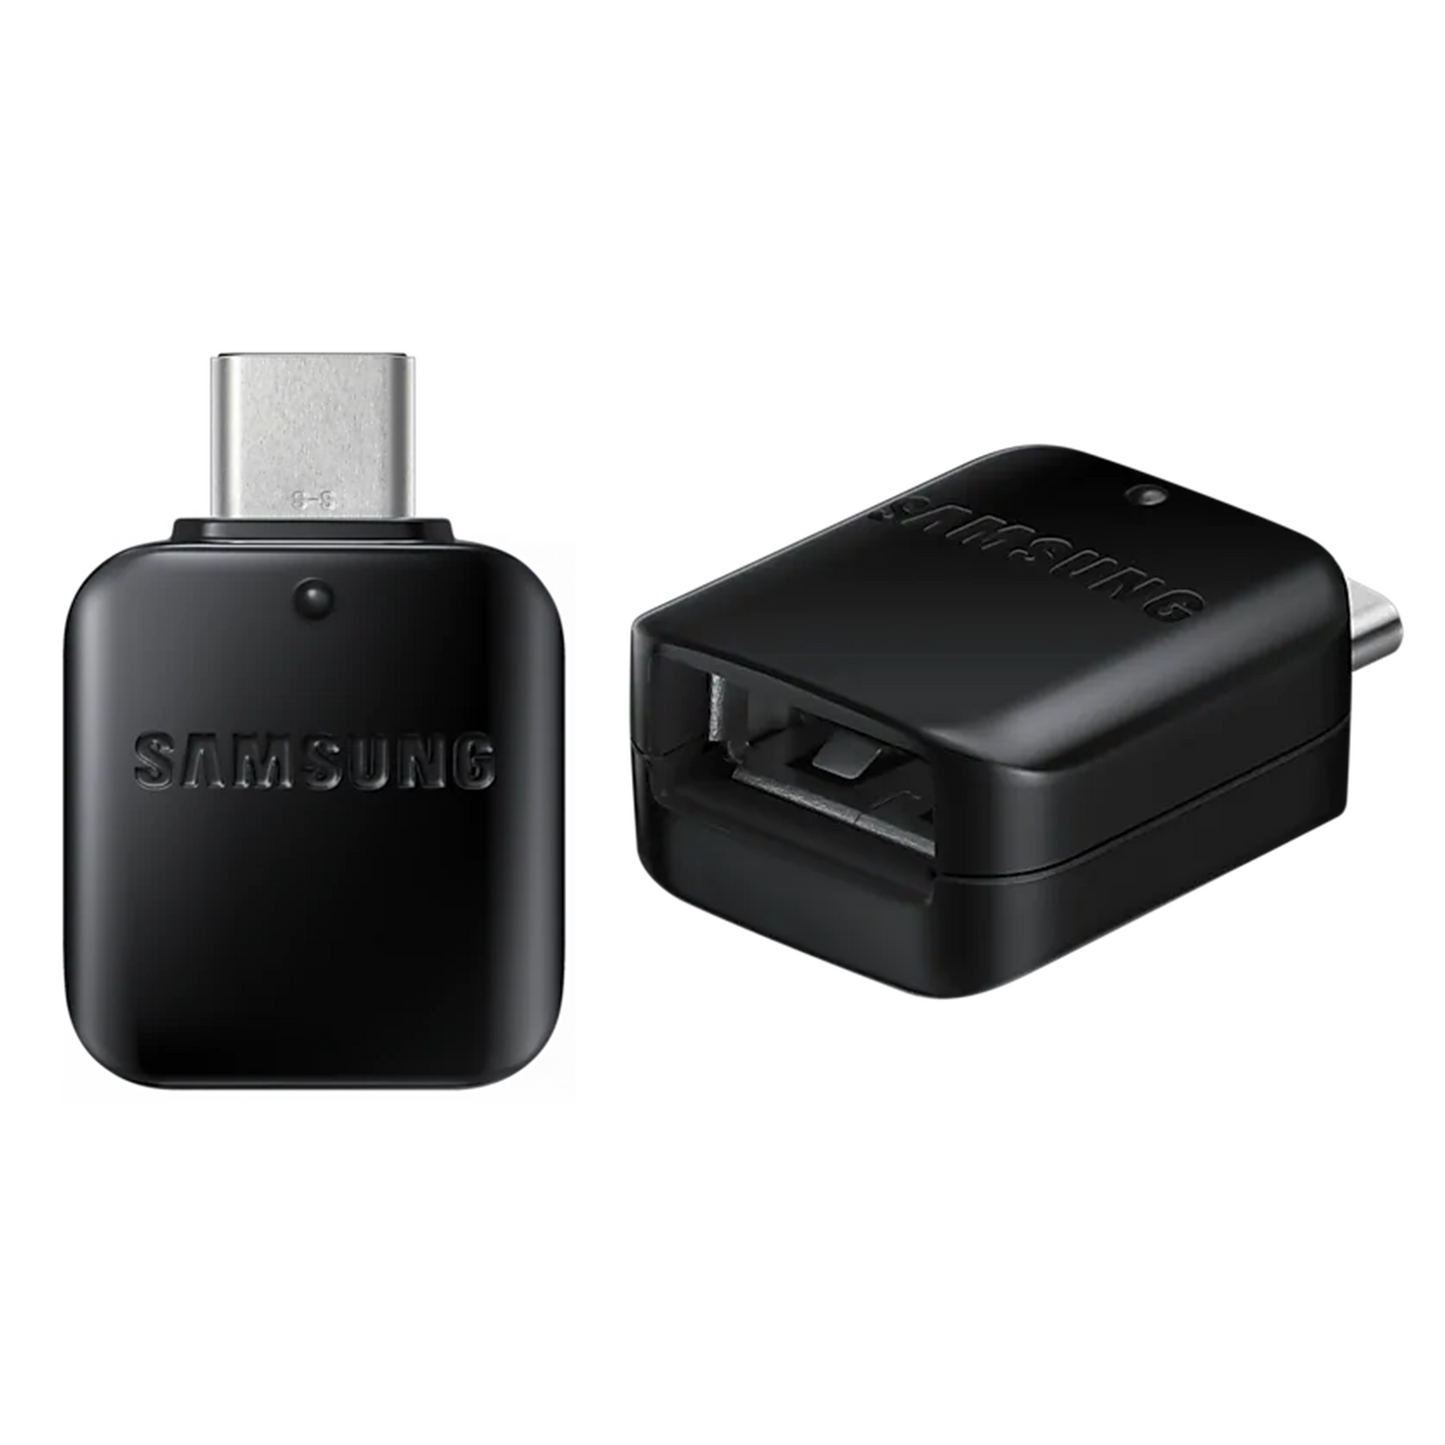 Samsung OTG Adapter USB Type-A Female to USB Type-C Male Connector Black